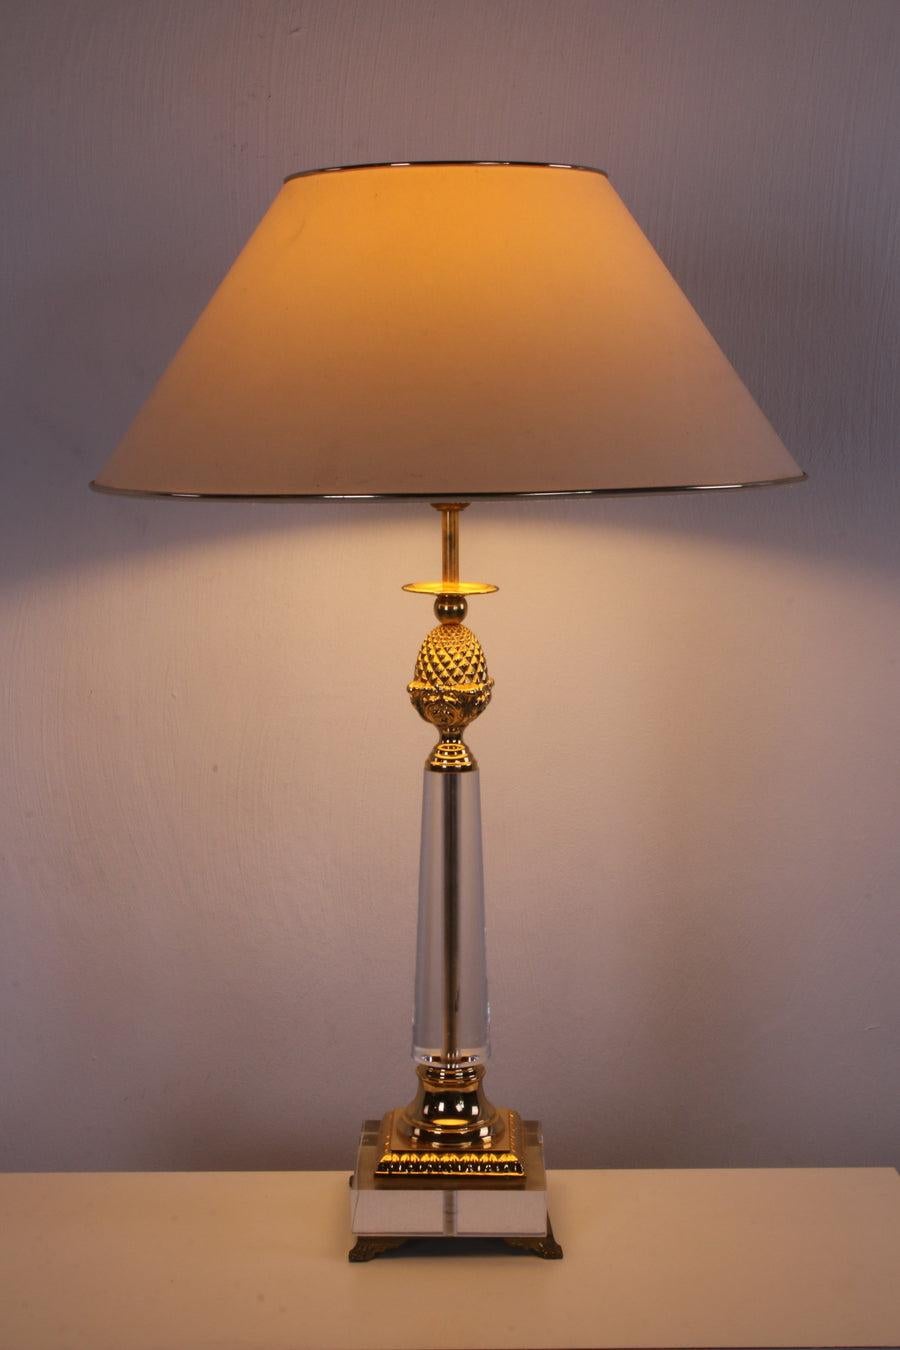 Plexiglas Table Lamp With Gold Elements Hollywood Regency Style

This is a table lamp with the Hollywood Regency style, it also has a pineapple in it and the base is made of plexiglass.
A beautiful specimen with hood, the cabling is also in